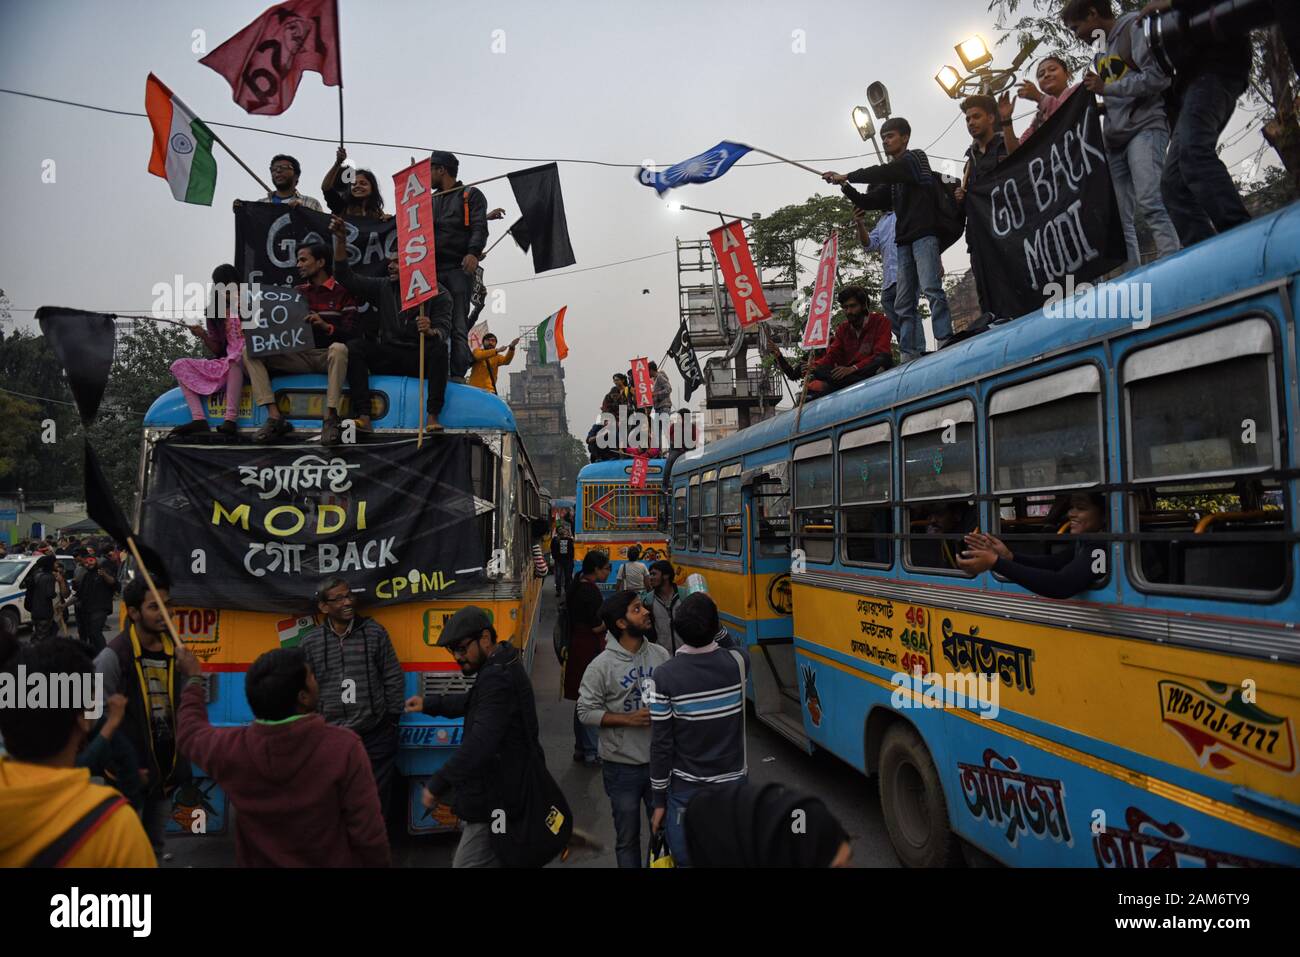 Kolkata, India. 11th Jan, 2019. Protesters shout slogans during the demonstration.Demonstration against the visit of India's Prime Minister Narendra Modi and also against (Citizenship Amendment Bill) or CAB which grants Indian citizenship to non-Muslims of Afghanistan, Pakistan and Bangladesh that was passed by the Indian Government in December 2019 and has created violence, strike and protest all over the India. Credit: Avishek Das/SOPA Images/ZUMA Wire/Alamy Live News Stock Photo